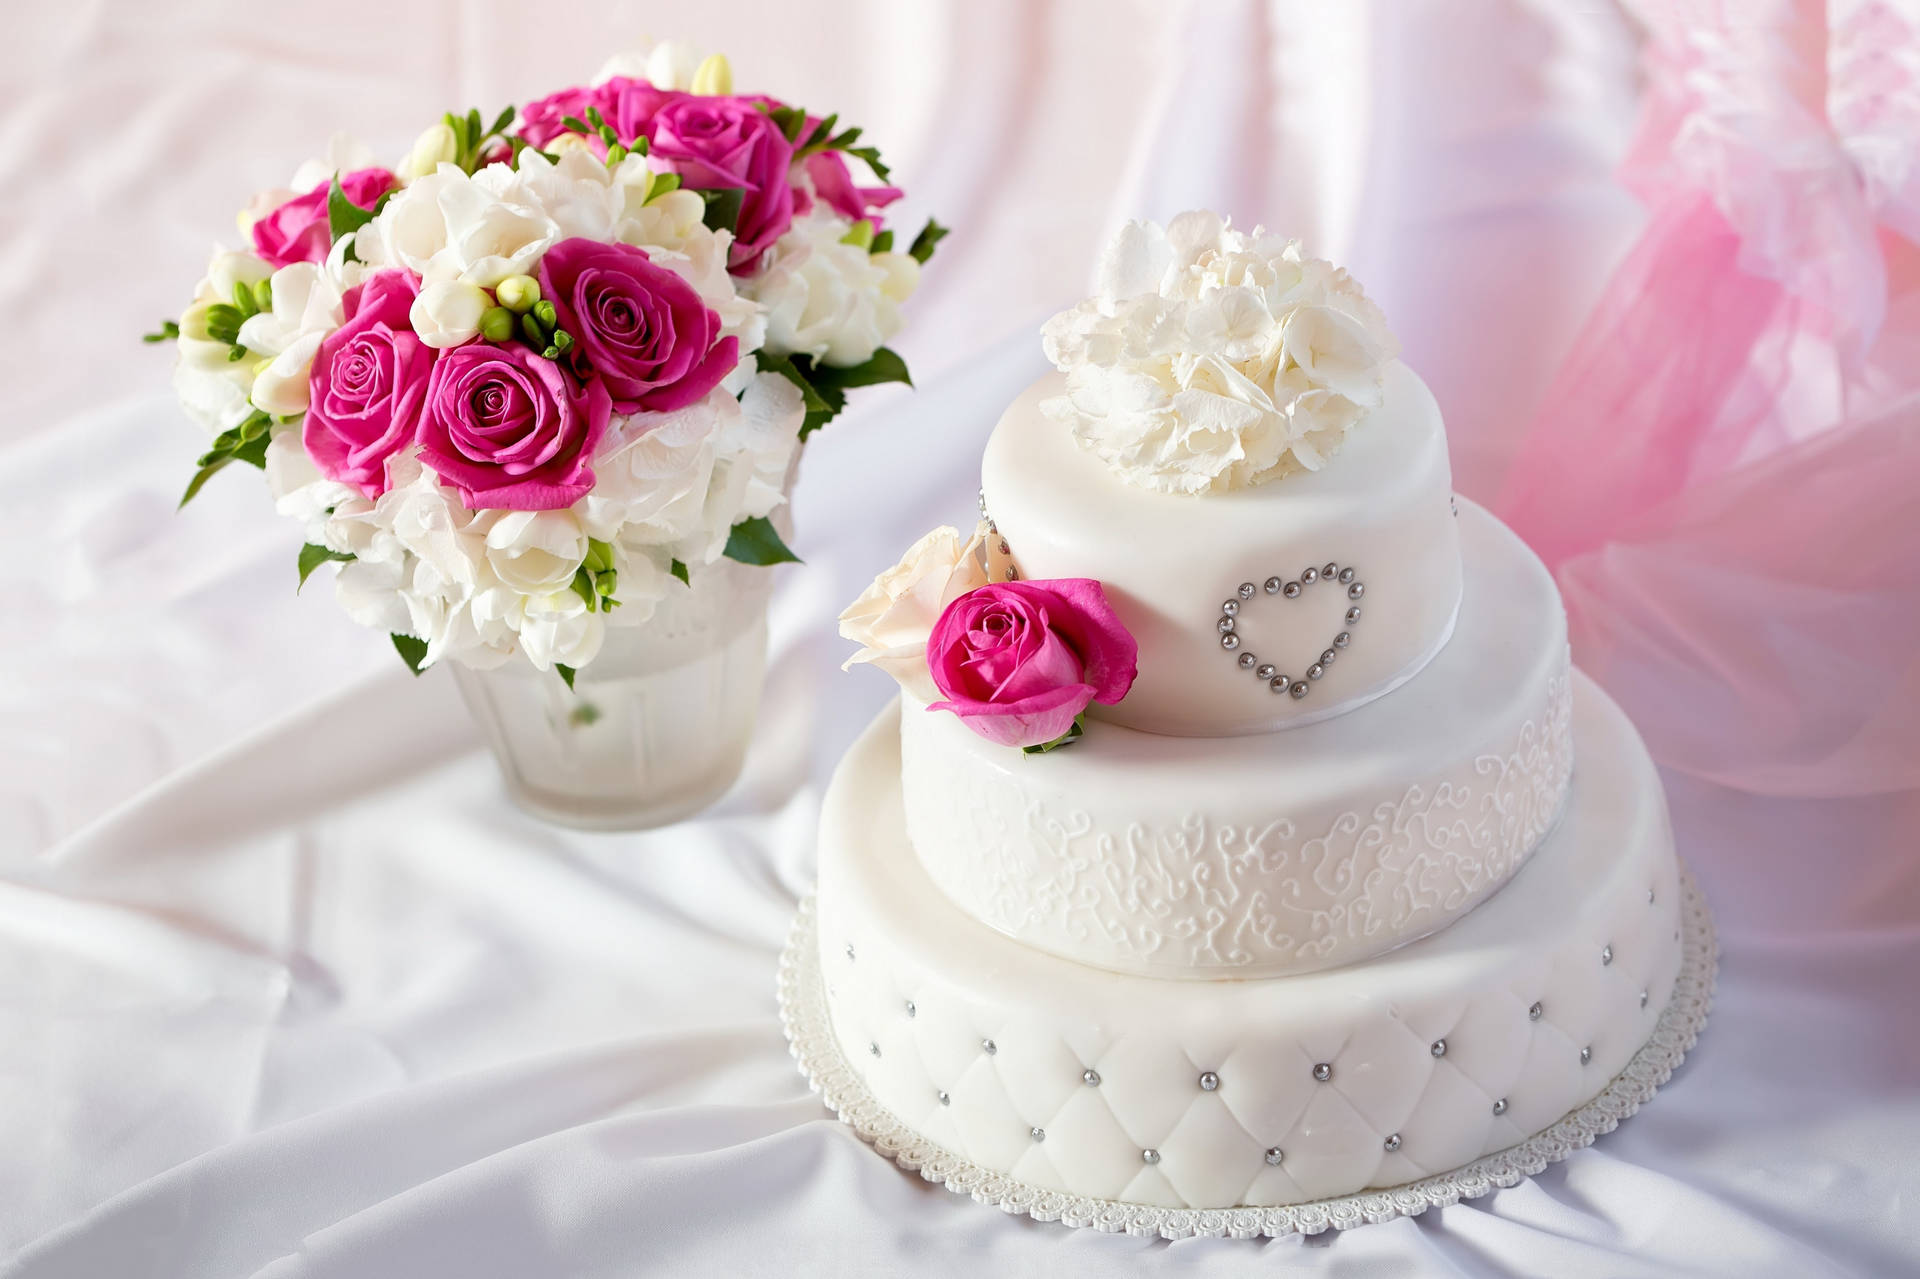 White Round Wedding Cake With Beads Near Roses Wallpaper